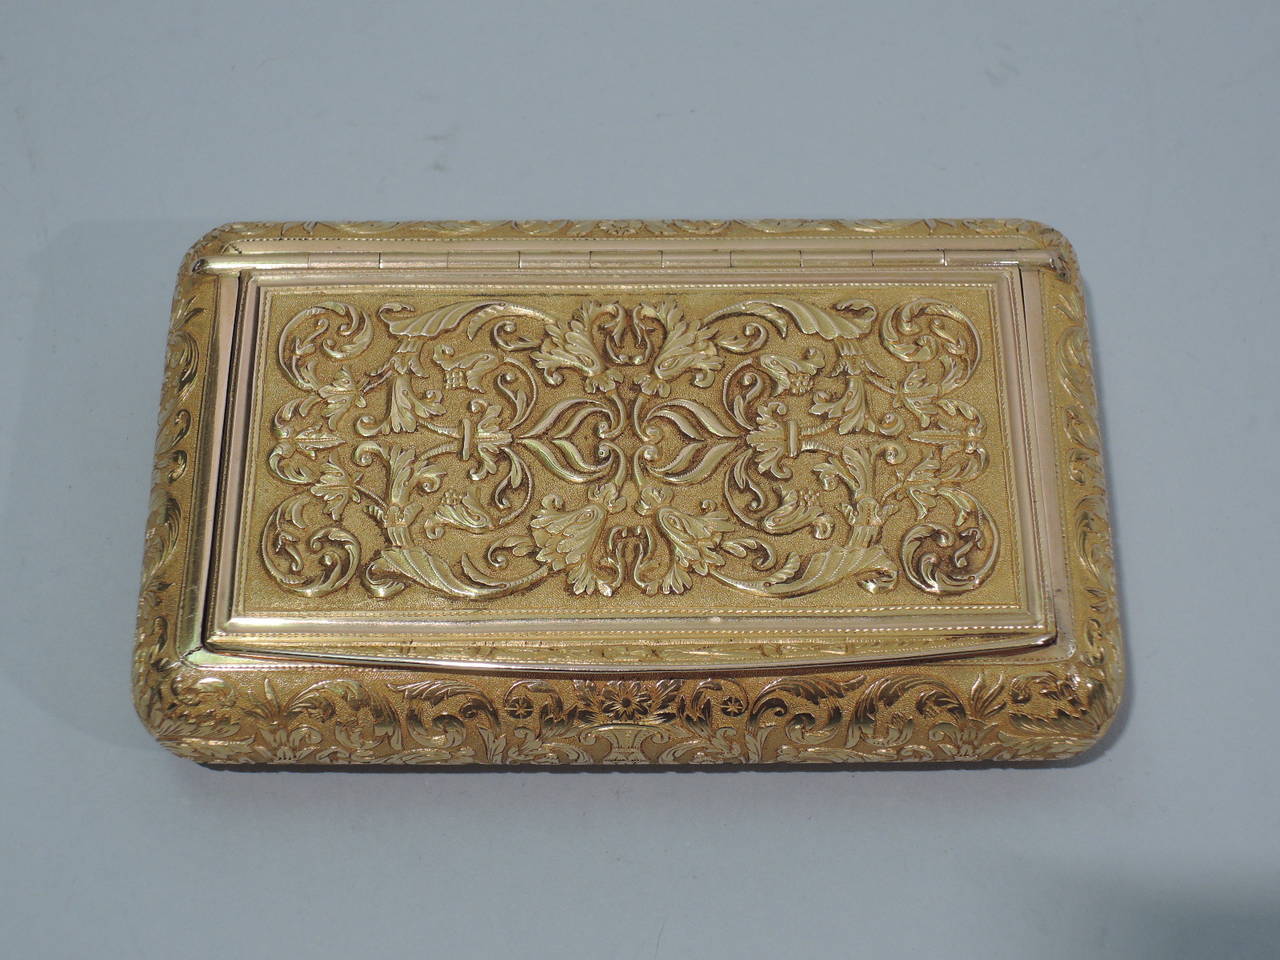 European 18k gold snuff box, ca. 1900. Rectangular with round corners. Cover is hinged with flared tab. Tooled scrolls, foliage, and flowers. On bottom is engine-turned wave ornament. Hallmarked 750 (that is, 18k gold).

Dimensions: H ¾ x W 3 ½ x